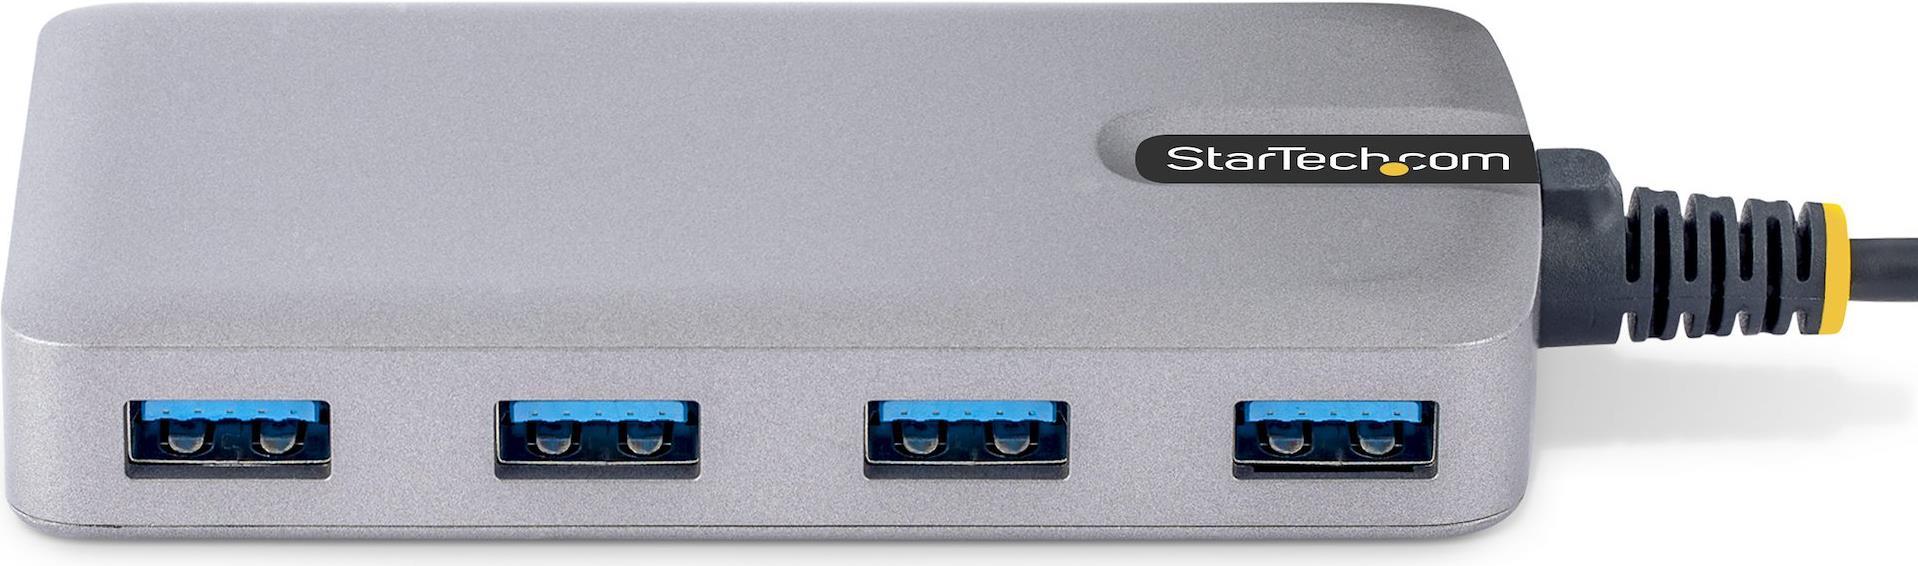 StarTech.com 4-Port USB Hub, USB3.0 5Gbps, Bus Powered, USB-A to 4x USB-A Hub with Optional Auxiliary Power Input, Portable Desktop/Laptop USB Hub with 1ft (30cm) Attached Cable (5G4AB-USB-A-HUB)